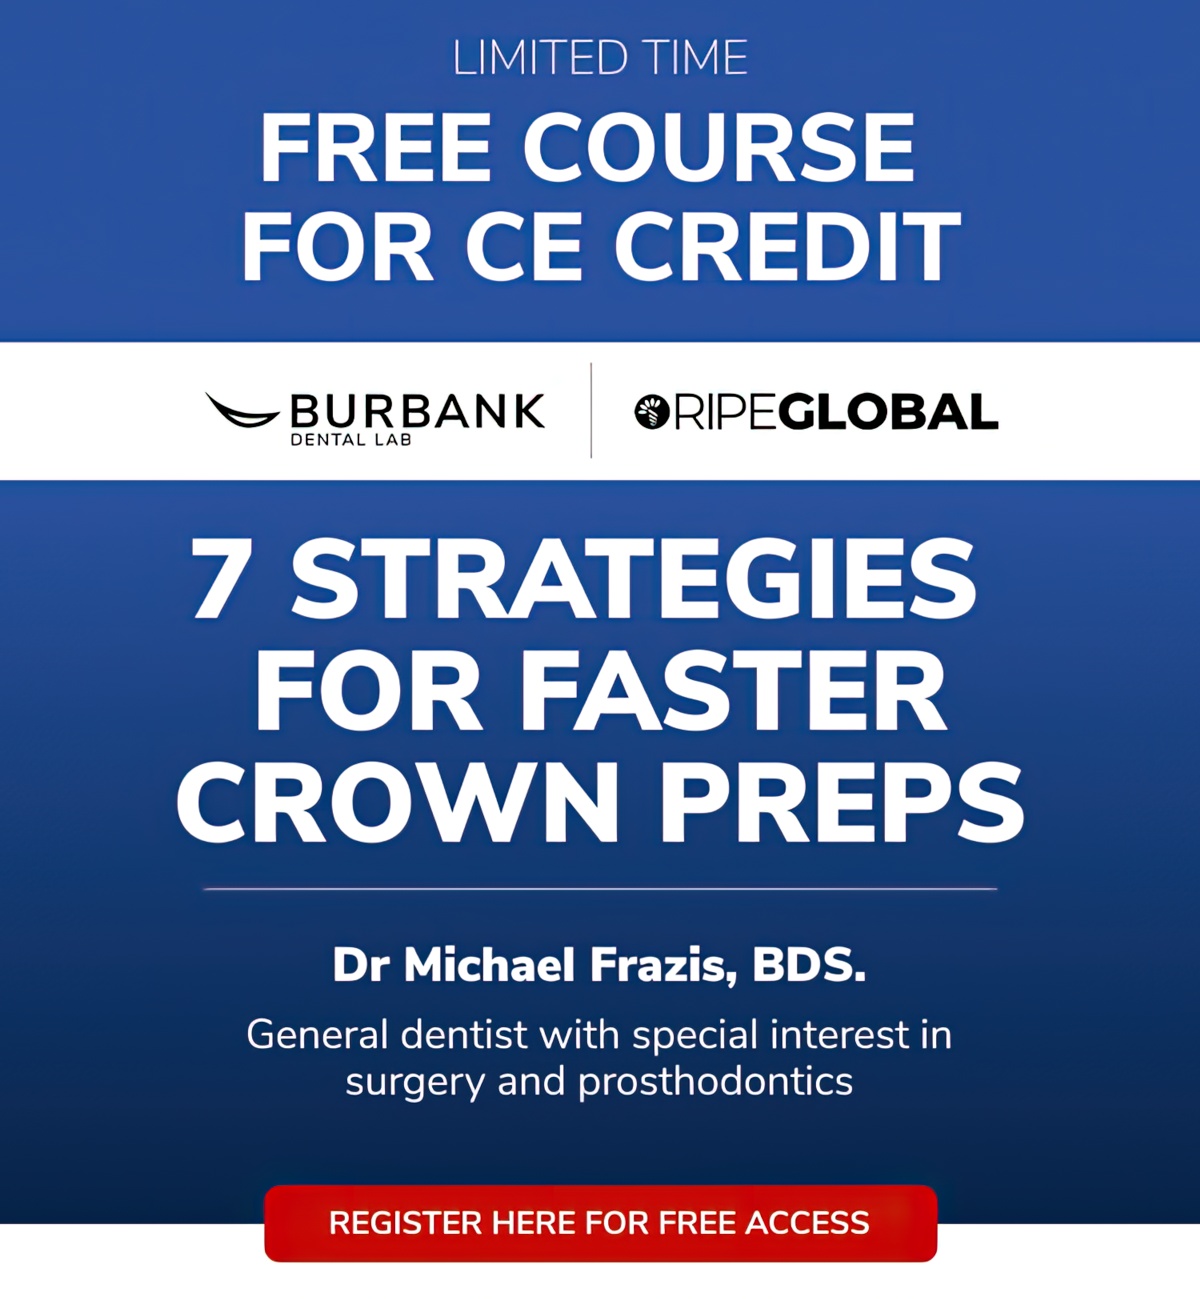 7 Strategies for Faster Crown Preps - Free CE Credit Online Course